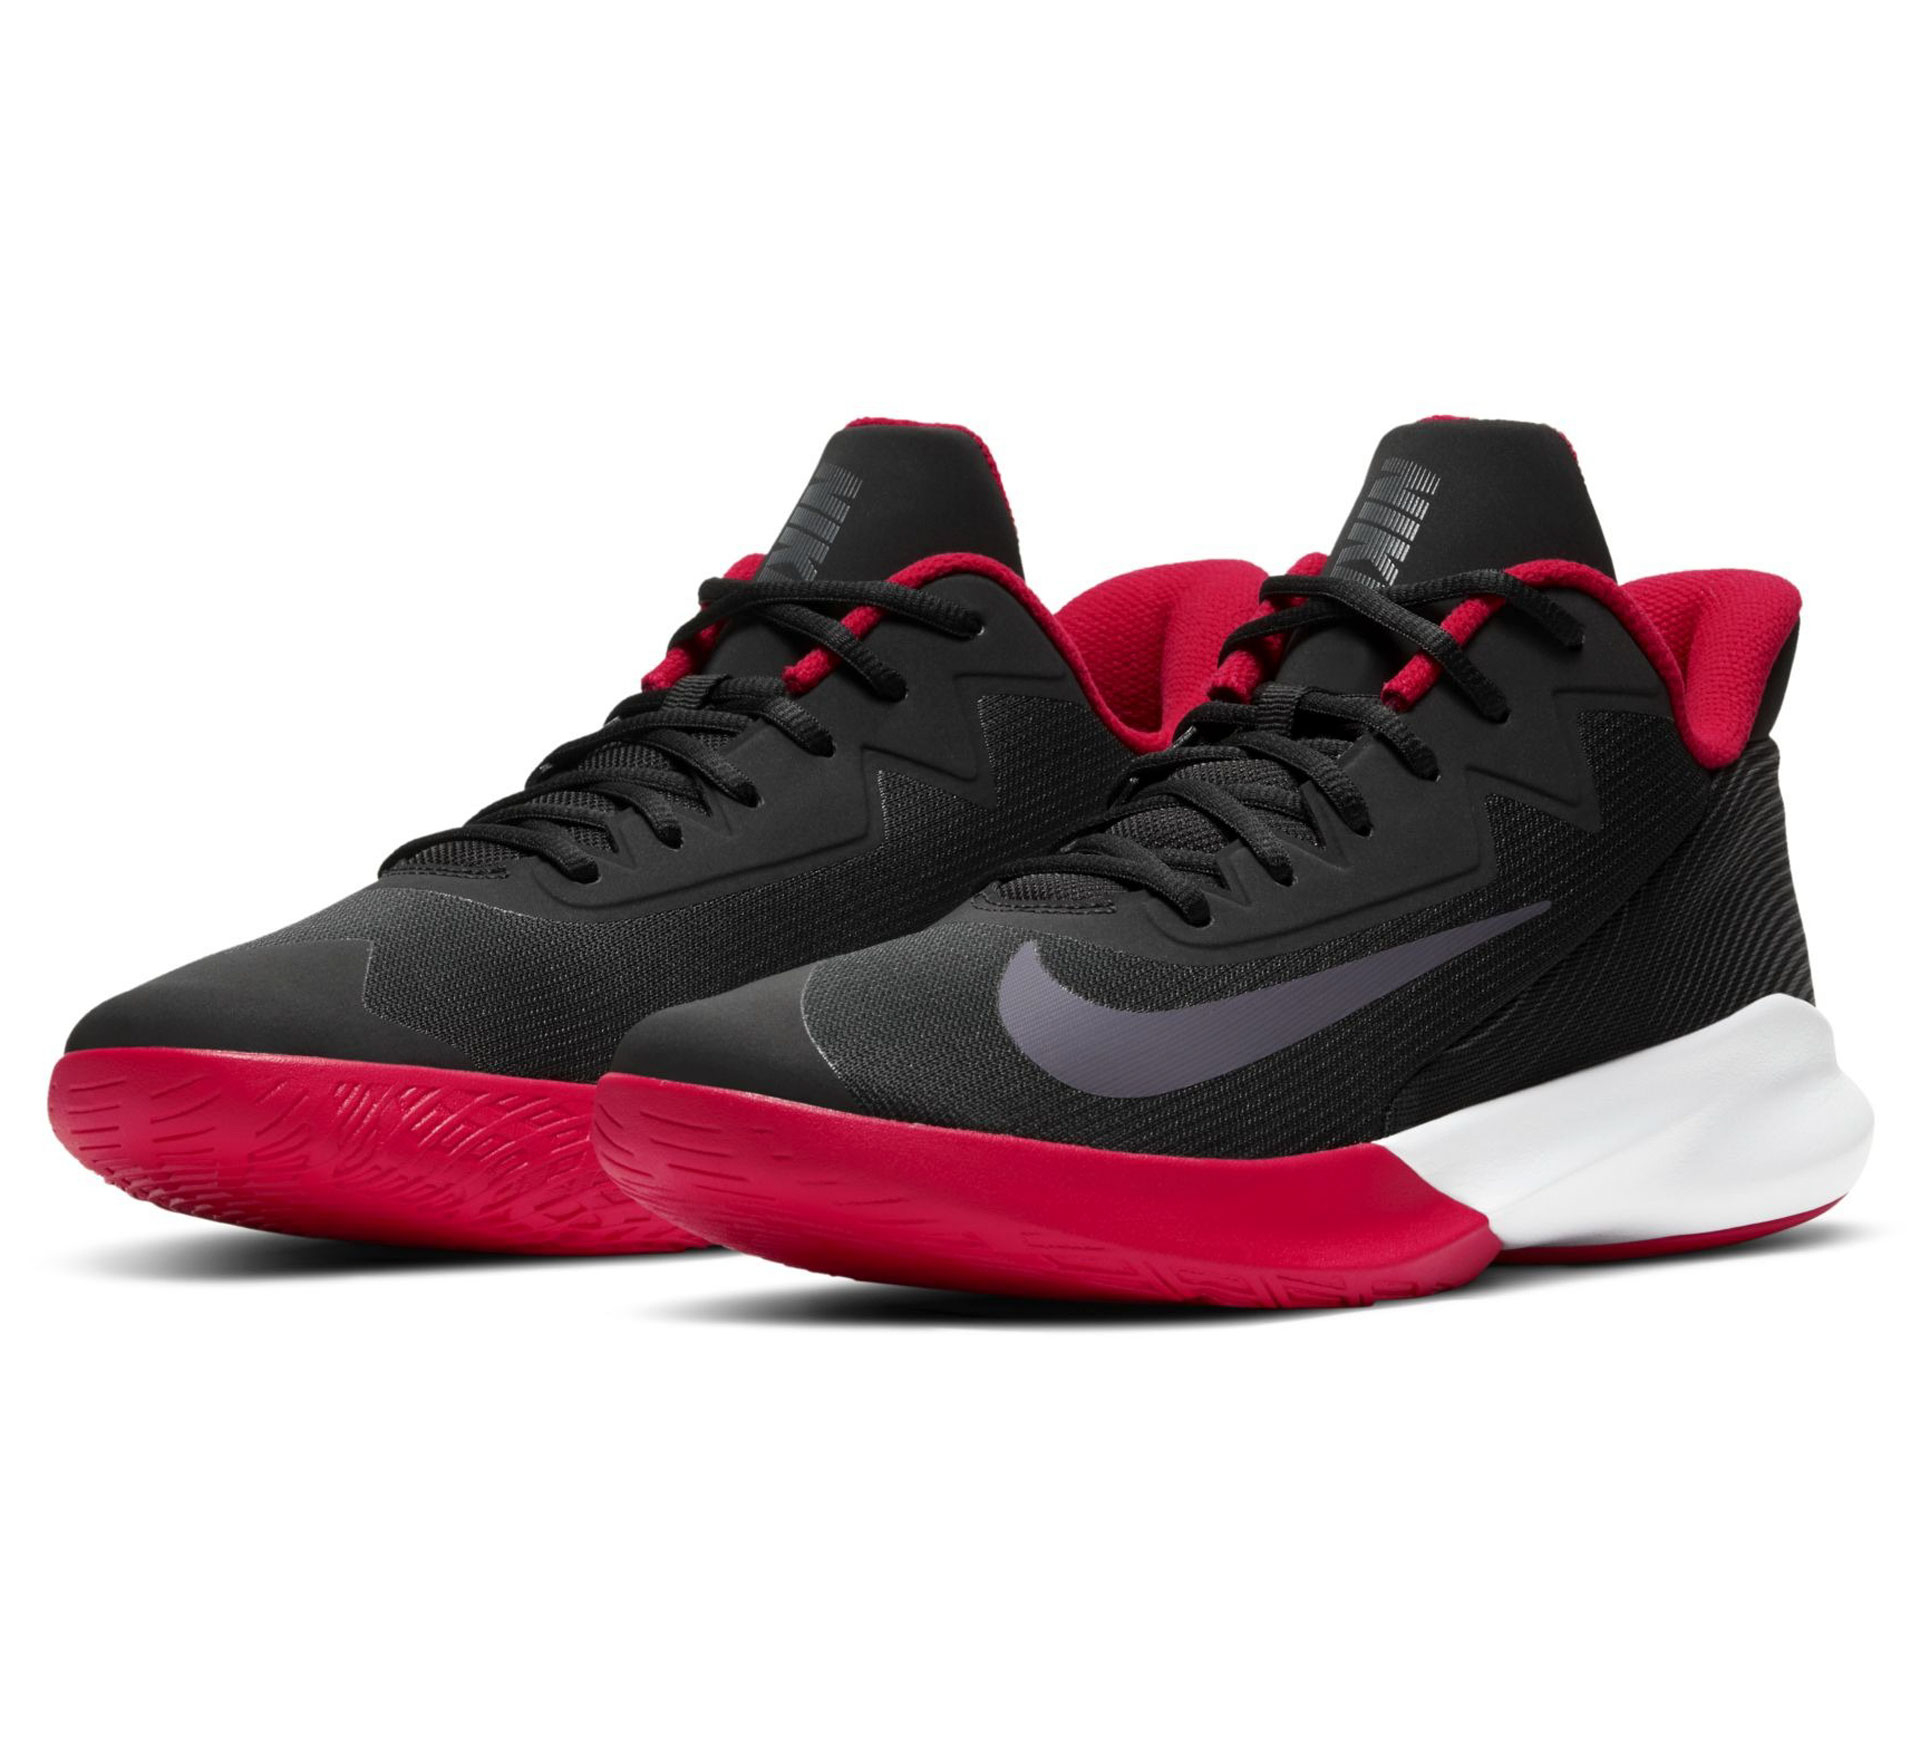 Chaussures de basketball Nike Precision IV Homme